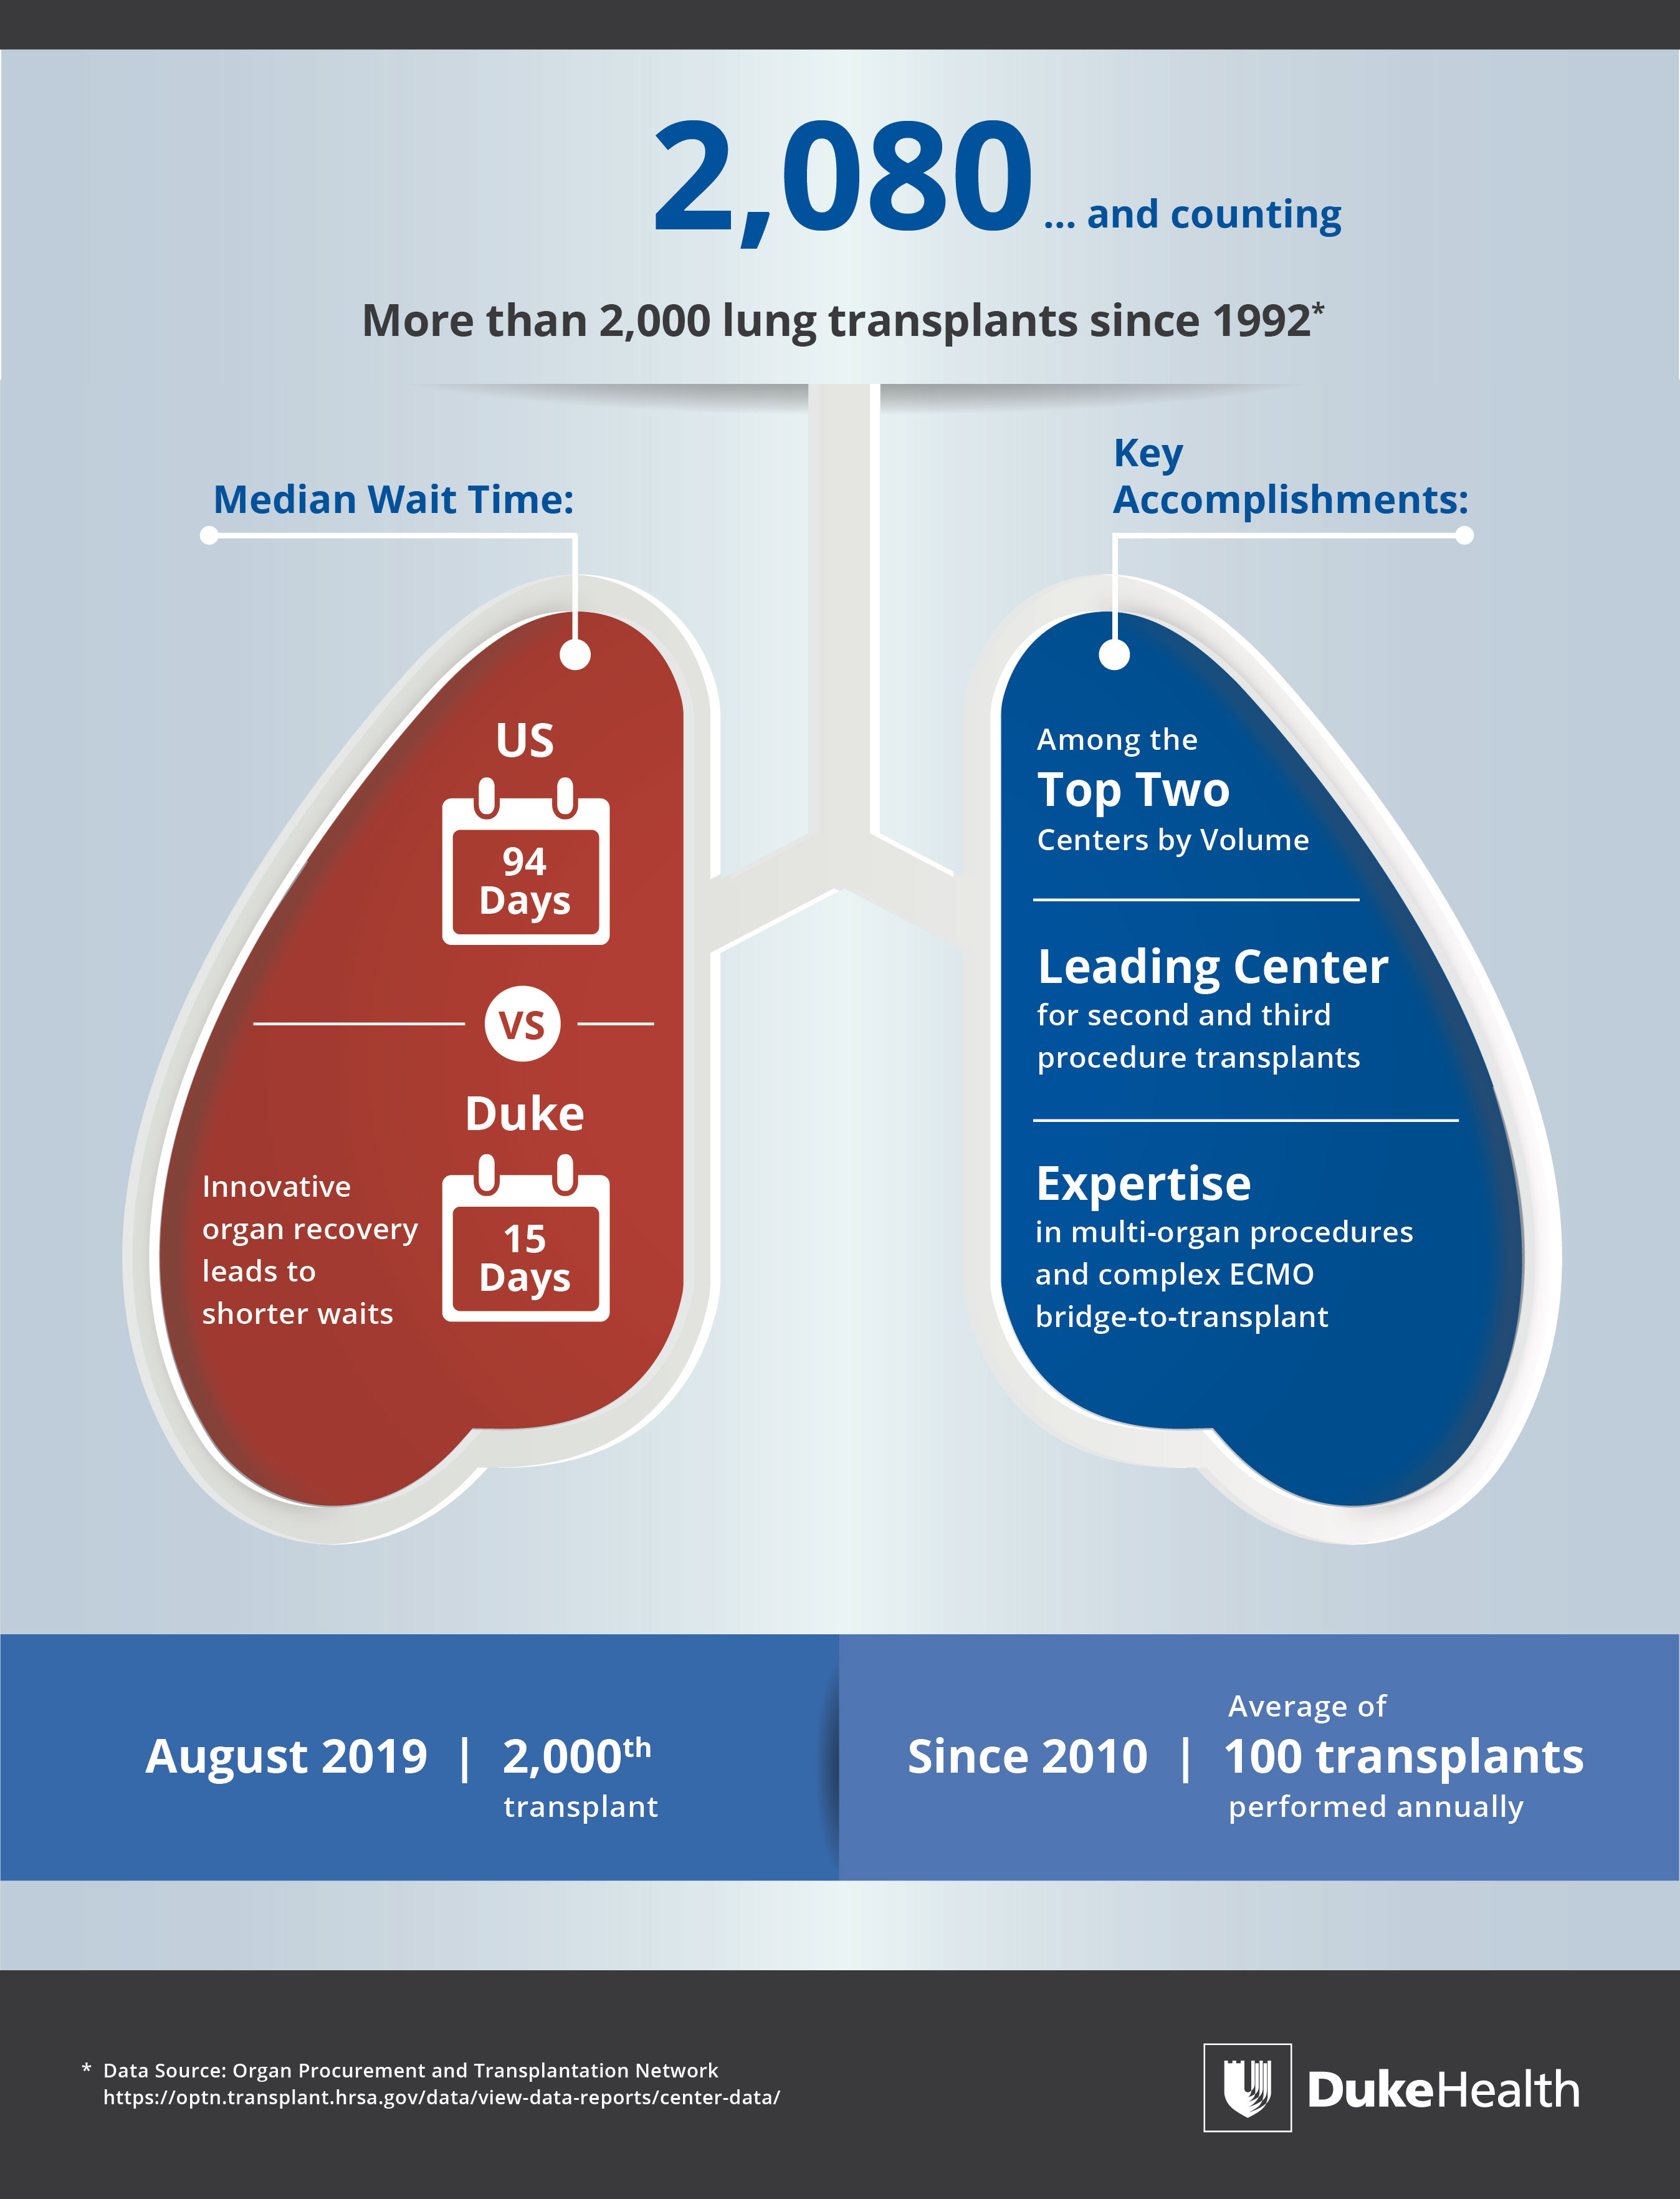 Highlights of the success of Duke's lung transplant program